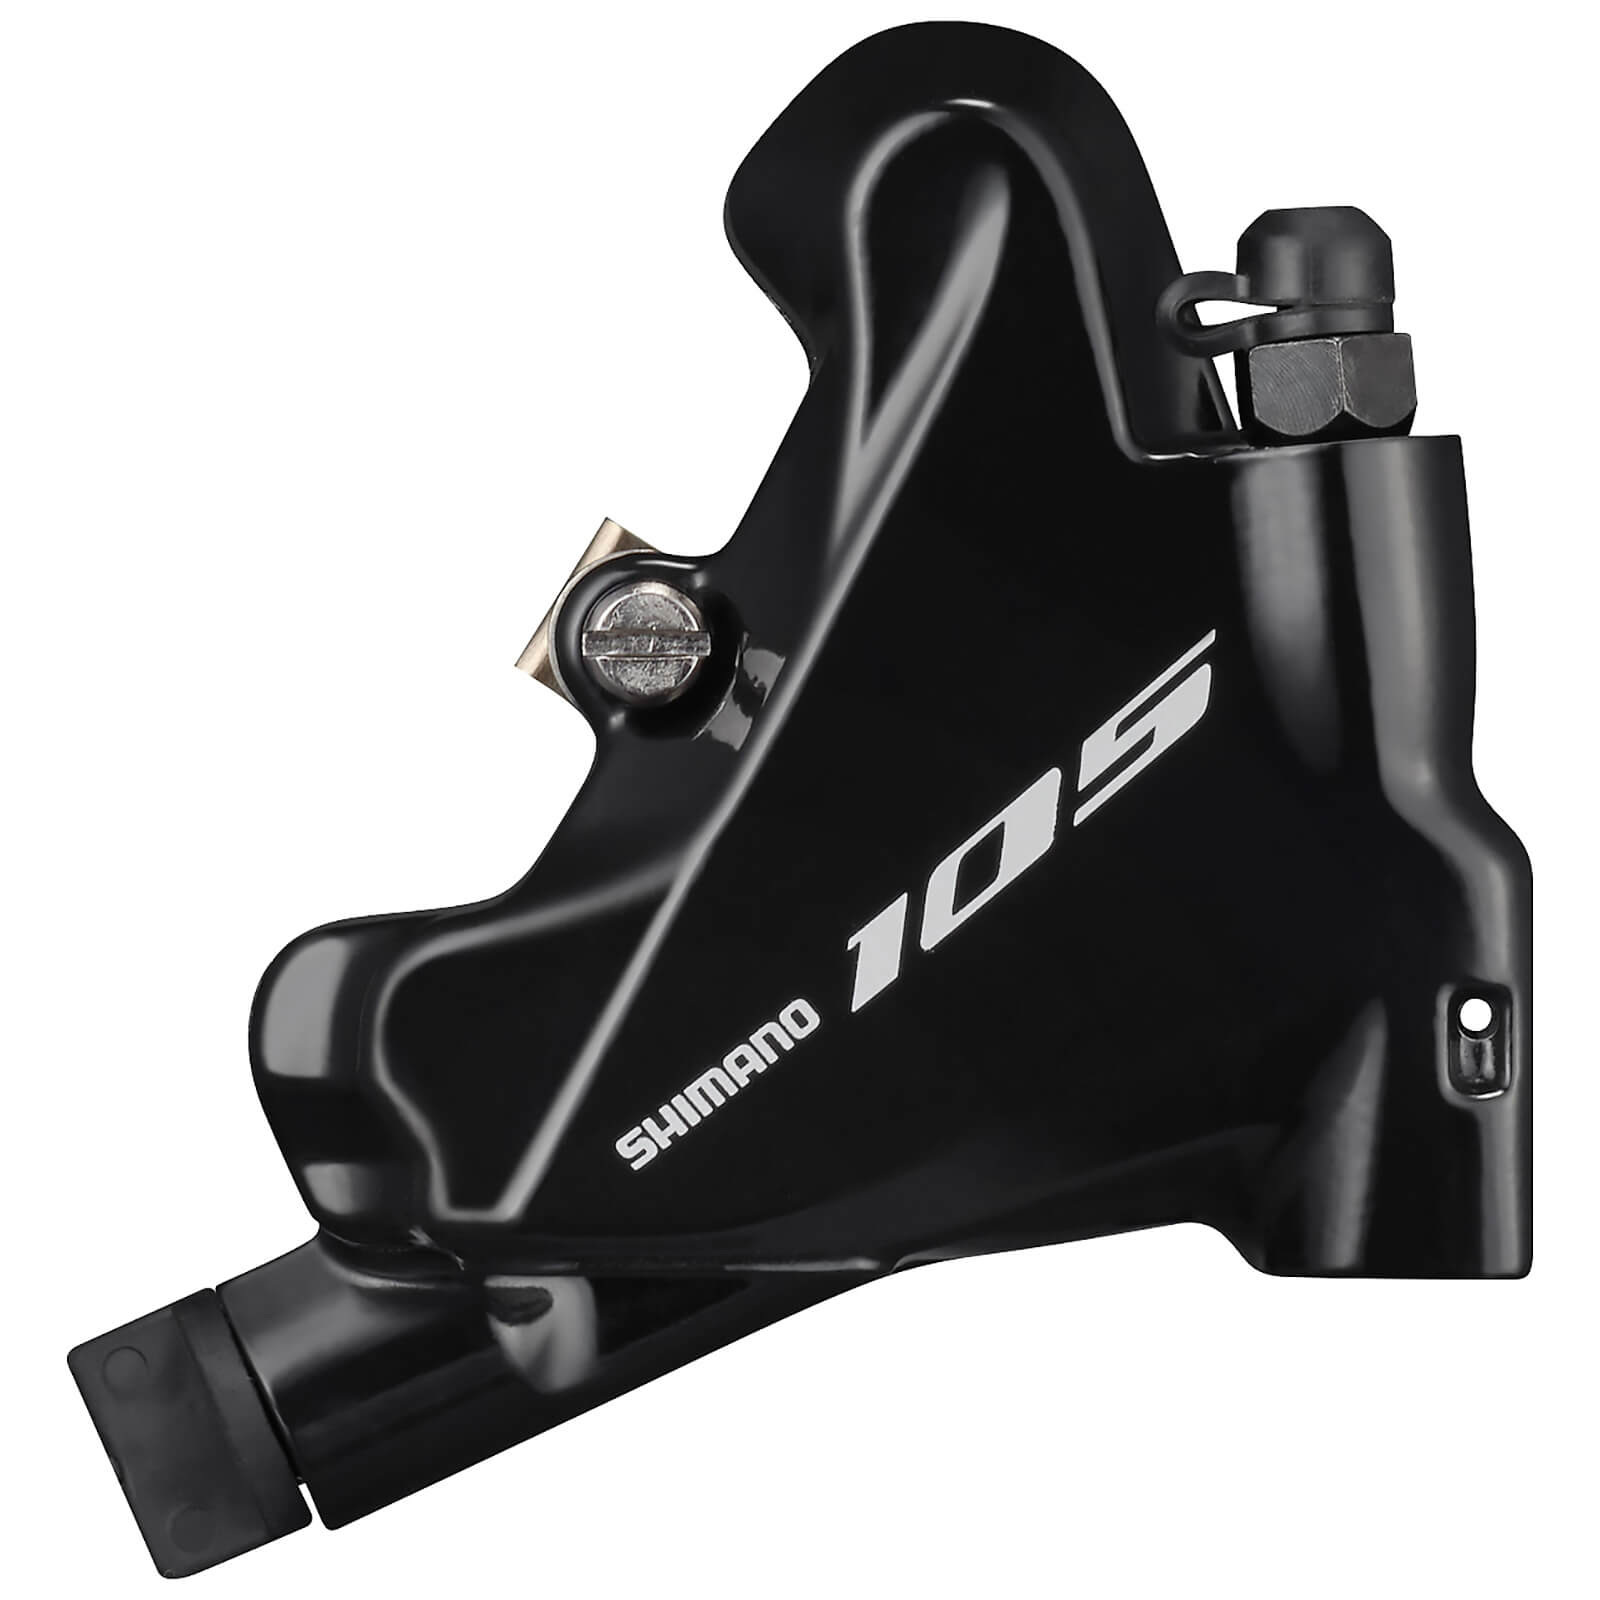 Shimano 105 BR-R7070 Hydraulic Brake Caliper Flat Mount Without Rotor or Adapters - Black